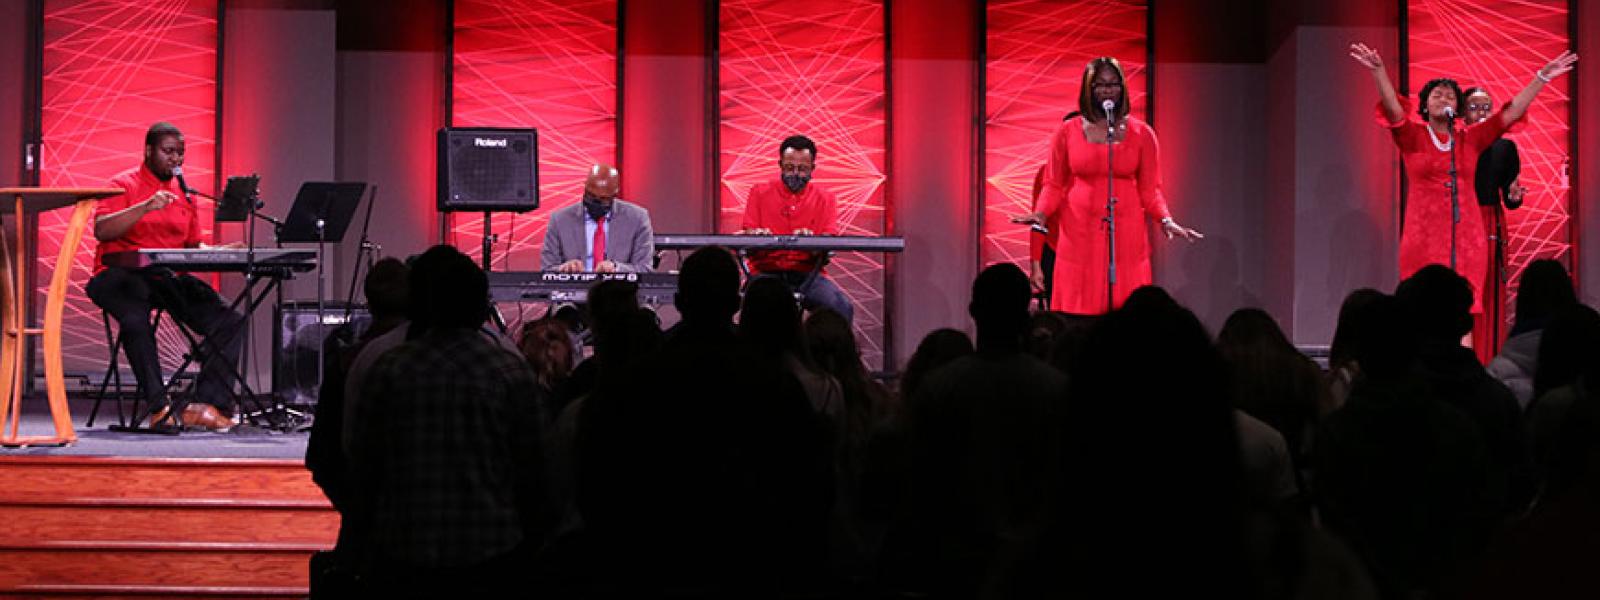 CIU worship team leads in praise during Black History Month 